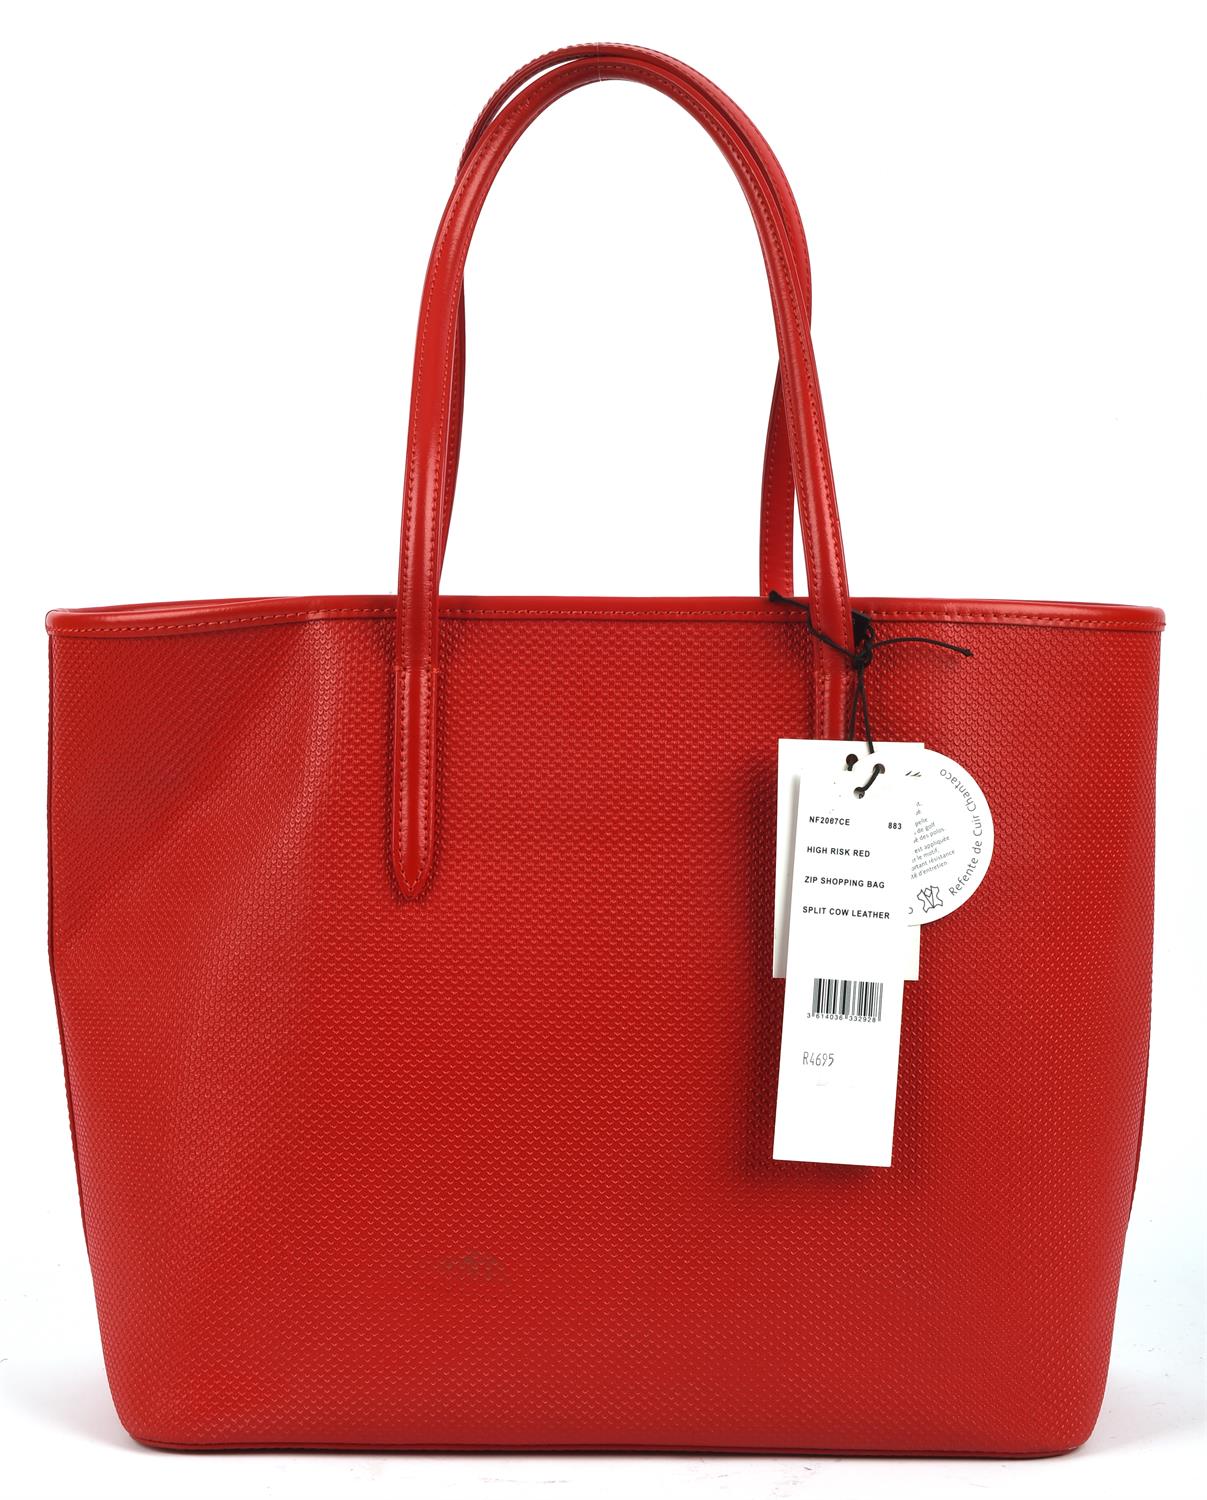 LACOSTE zipped "High Risk Red" split leather tote shopping bag (29cm x 29cm x 6cm) - Image 3 of 6